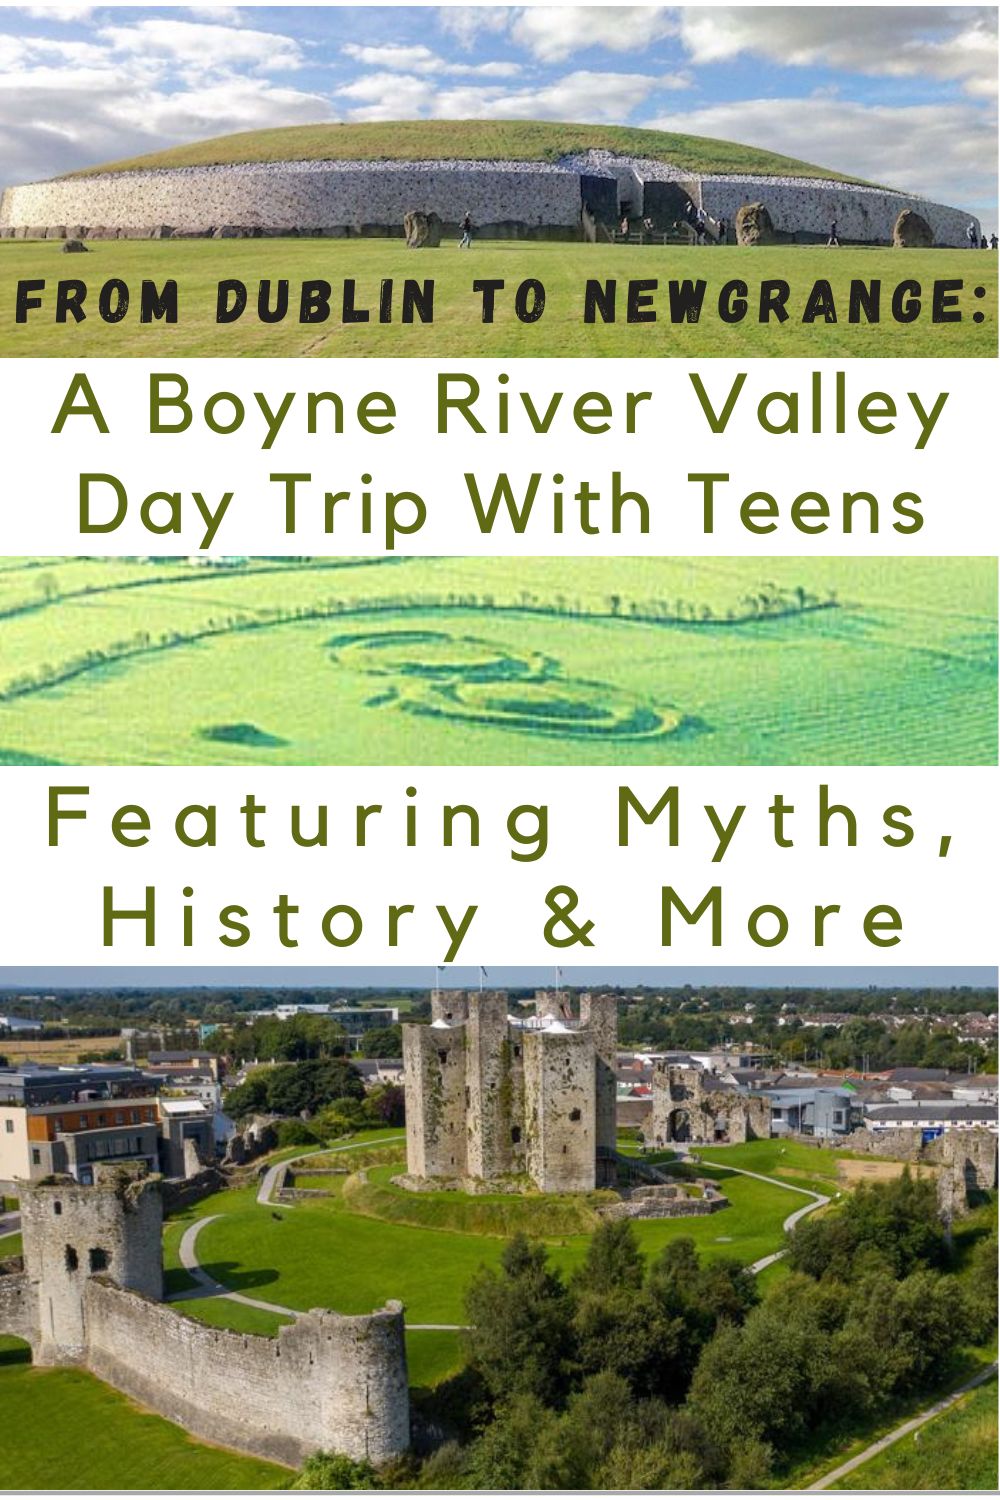 this easy day trip from dublin to newgrange includes ancient tombs, a battlefield, 2 castles, 2 medieval towns and 1 ghost story. you and your teens will love it.